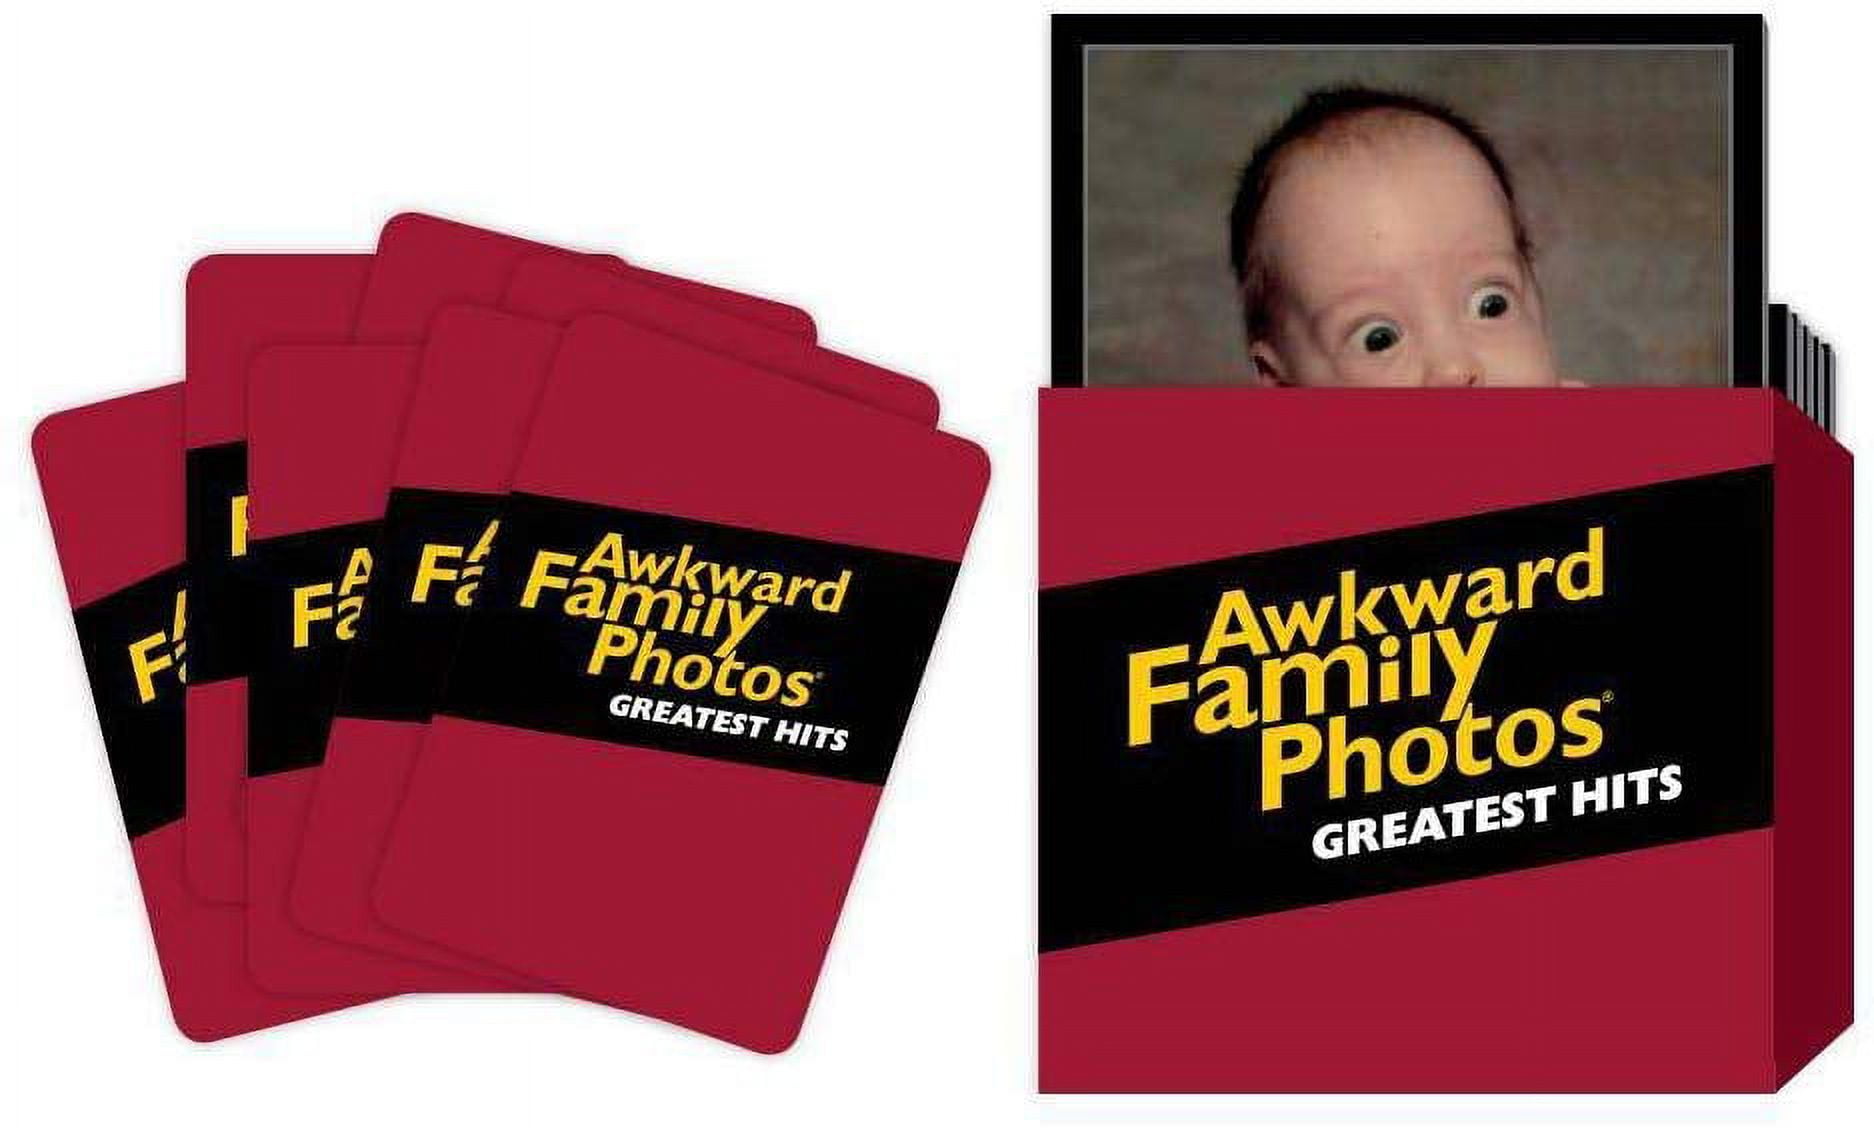 Awkward Family Photos Board Game 251657481149 for sale online